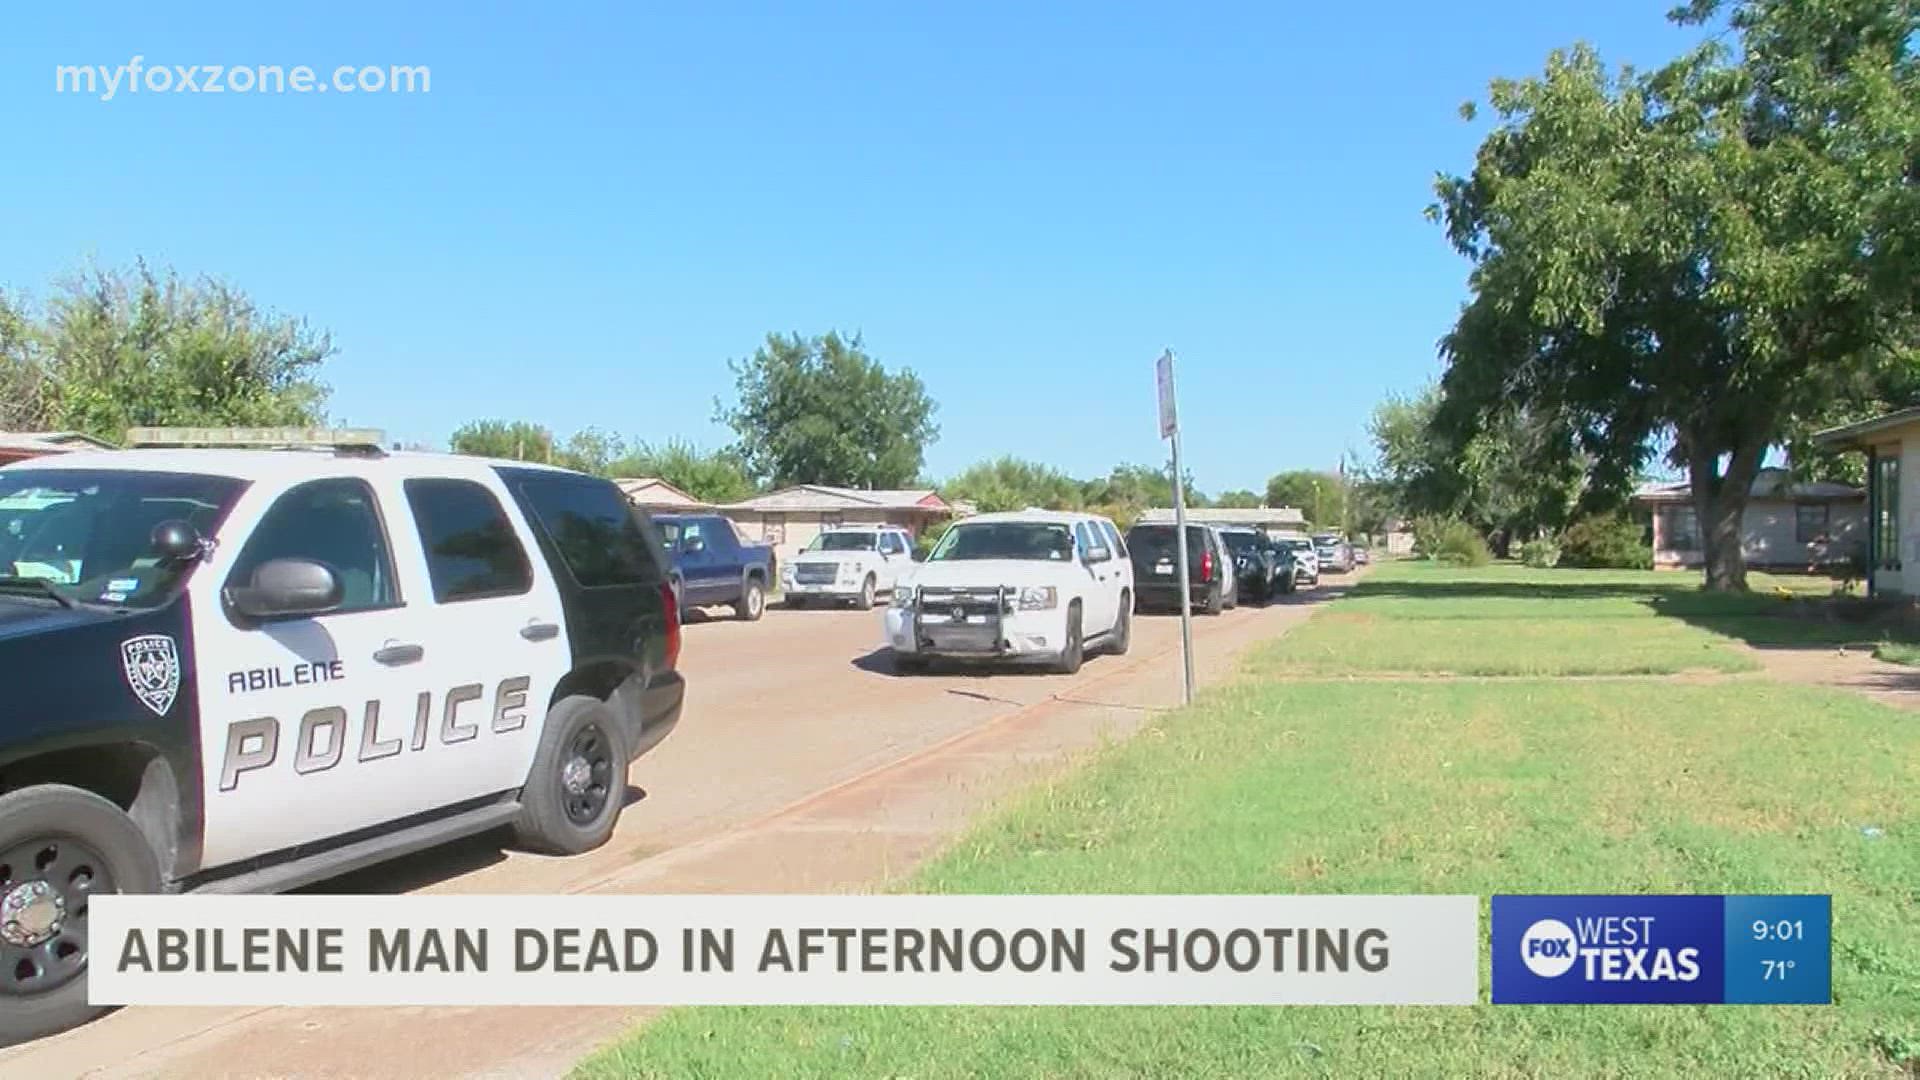 The suspect in the shooting has been arrested after leading Abilene Police on a brief chase.